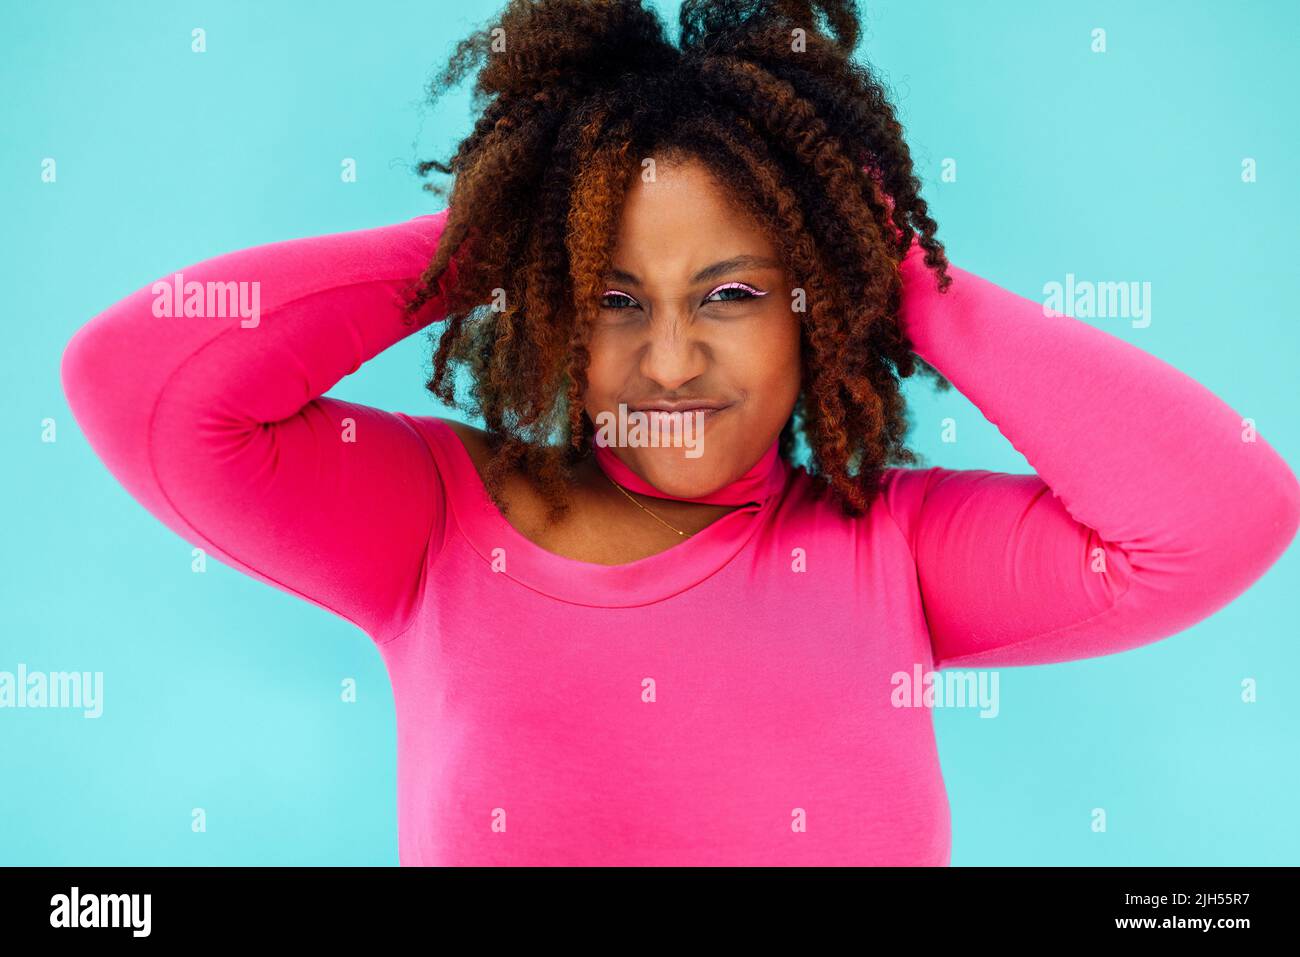 Dreamy young beautiful African American woman with bright eyelines wearing pink bodysuit over blue wall keeps hands pressed together under chin, looks Stock Photo